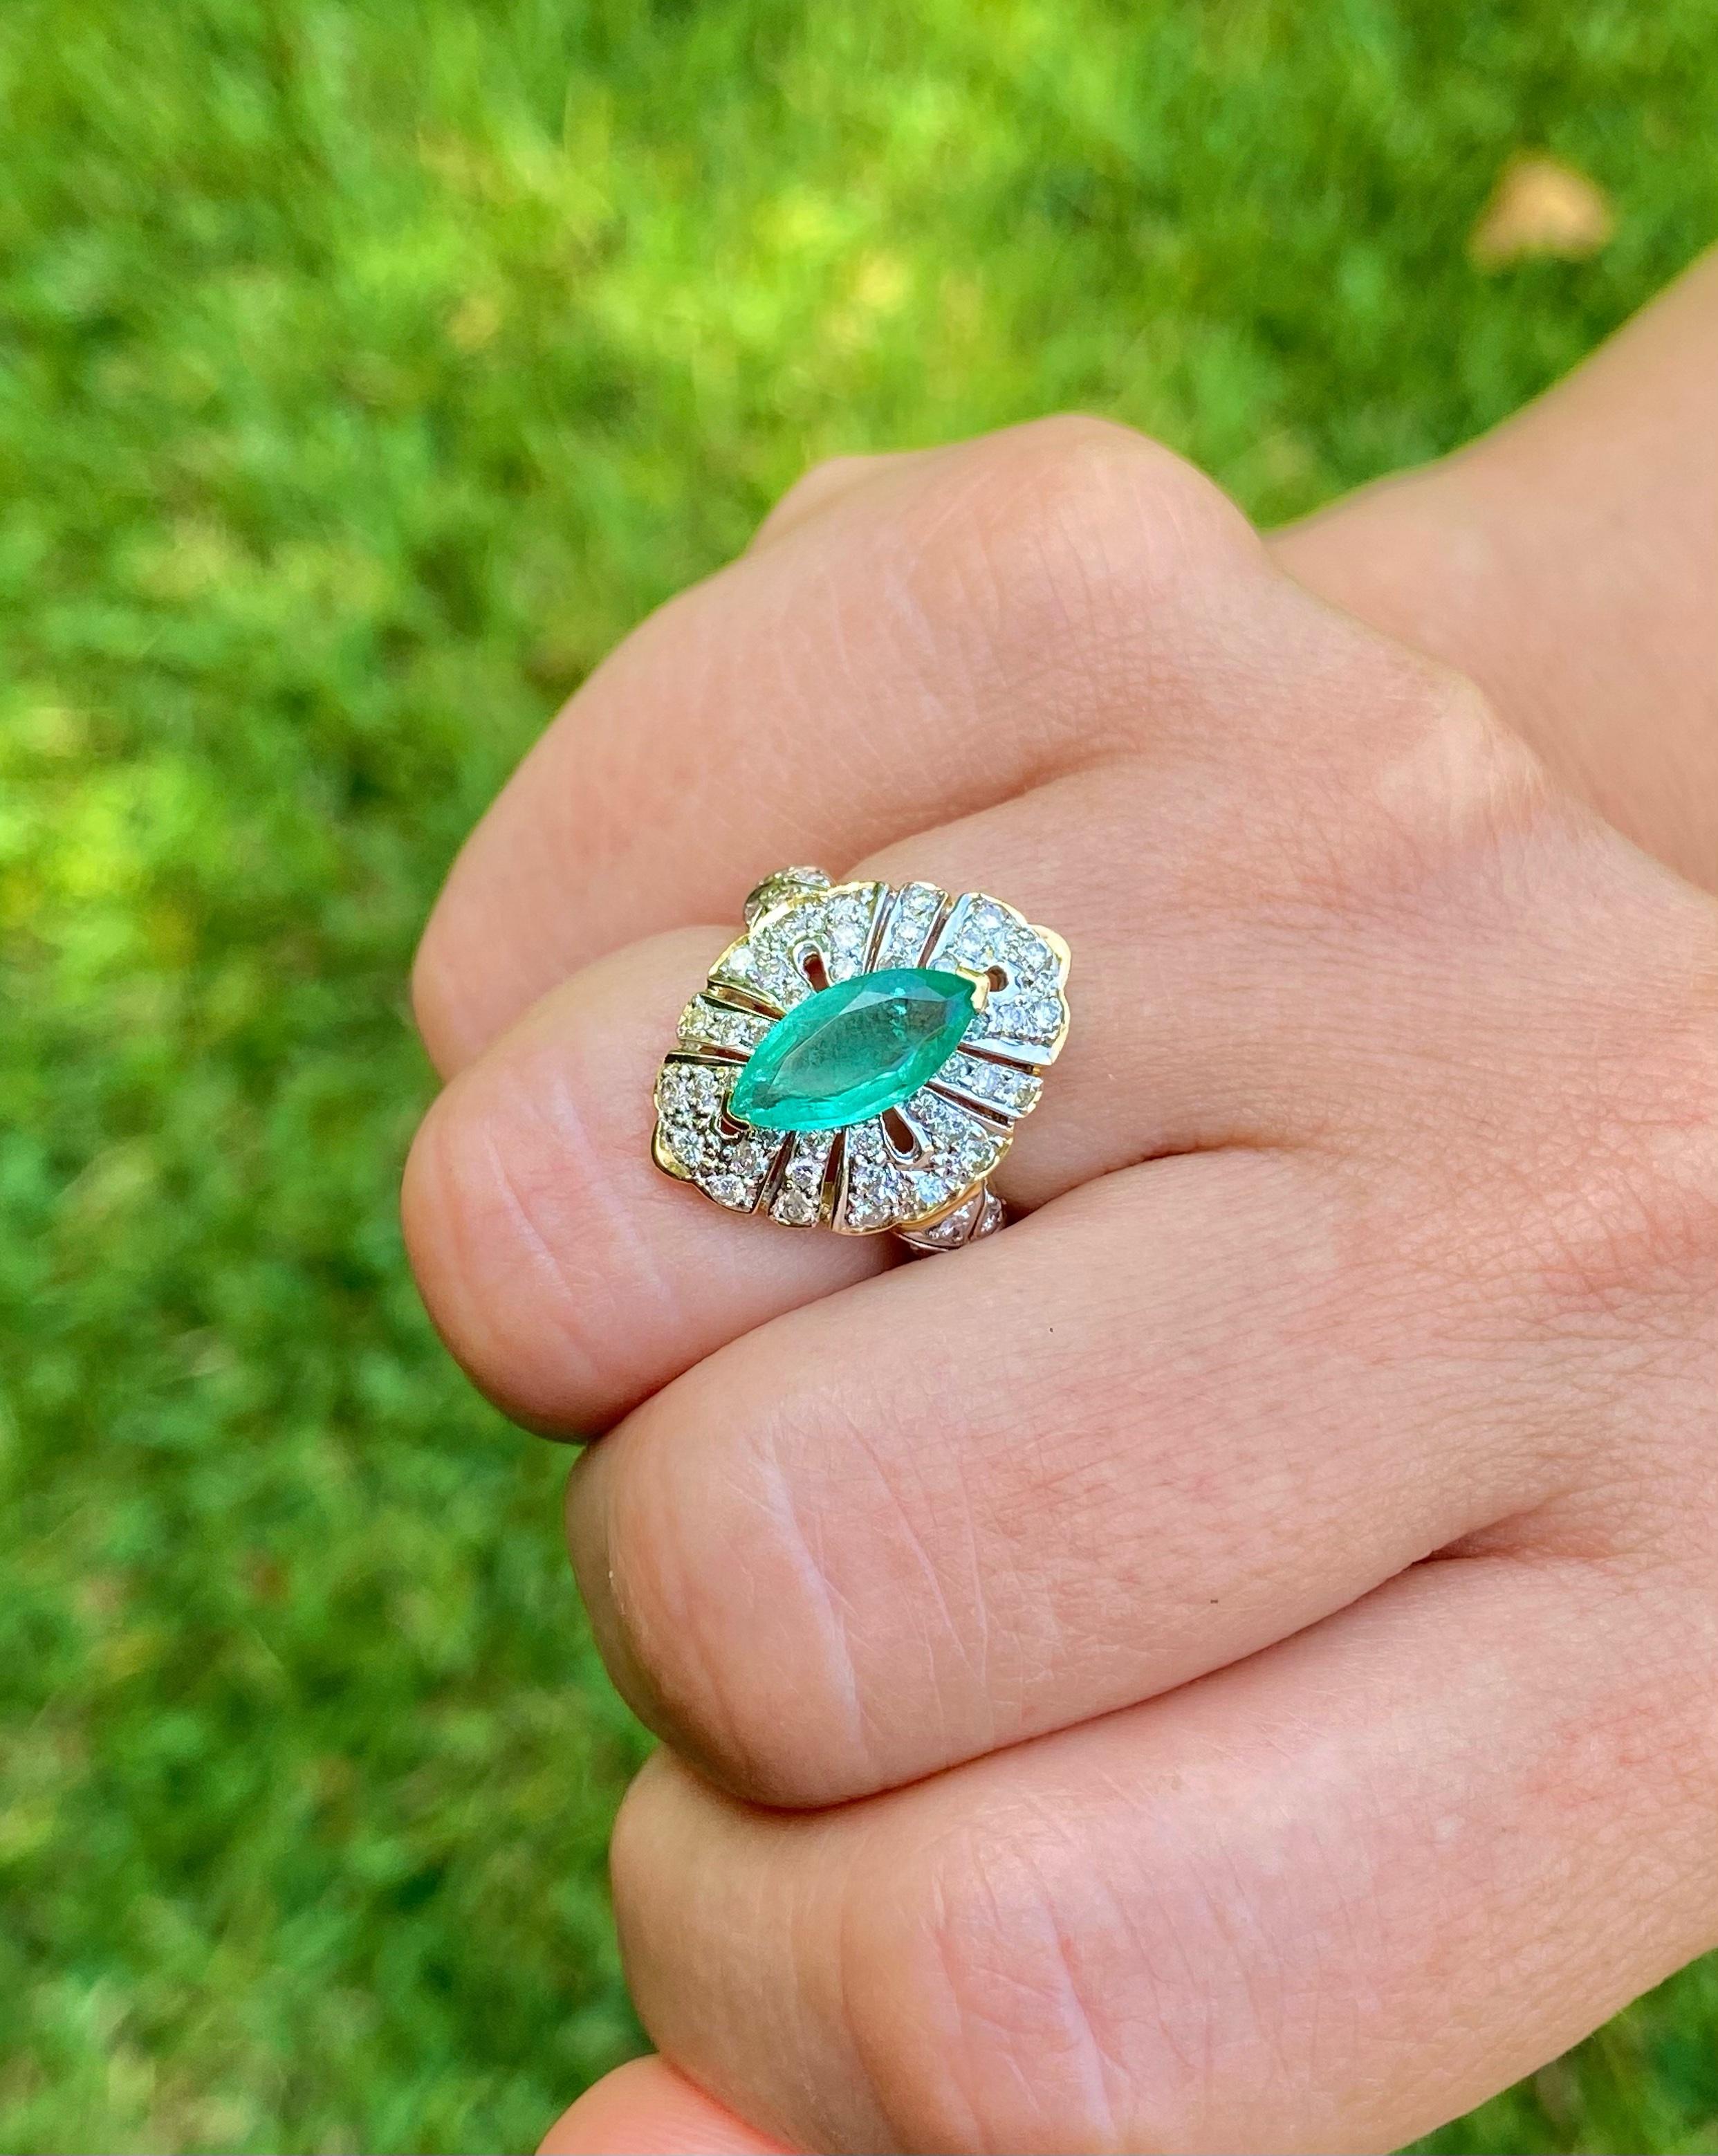 Centering a 0.75 Carat Marquis-Cut Colombian Emerald, framed by an additional 0.75 Carats of Round-Brilliant Cut Diamonds, and set in lush 14K Yellow Gold, this vintage classic is unisex– meaning its truly suitable for ANY occasion!

Details:
✔